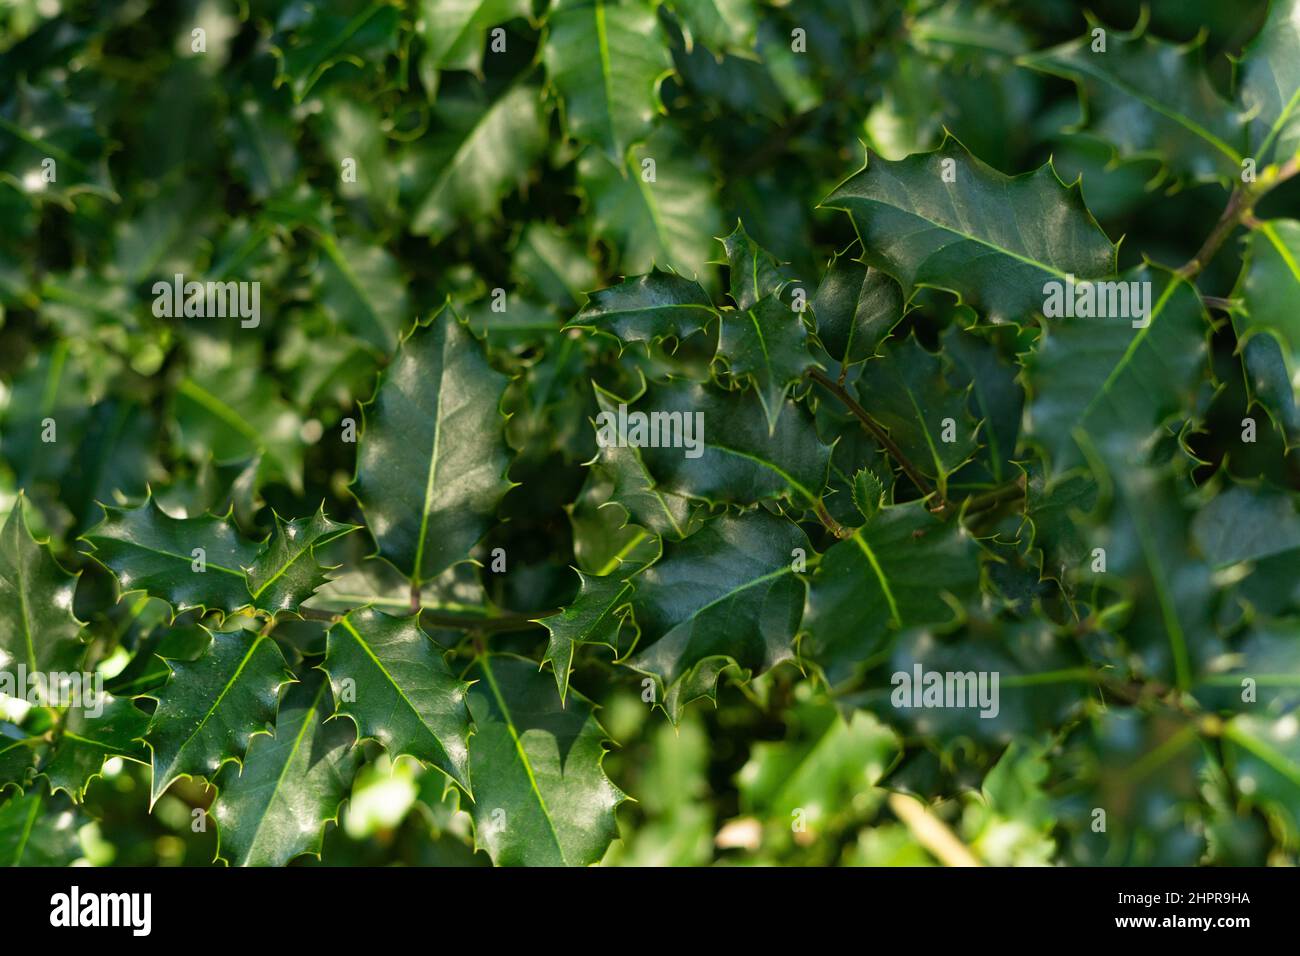 Holly leaves texture filling the entire frame Stock Photo